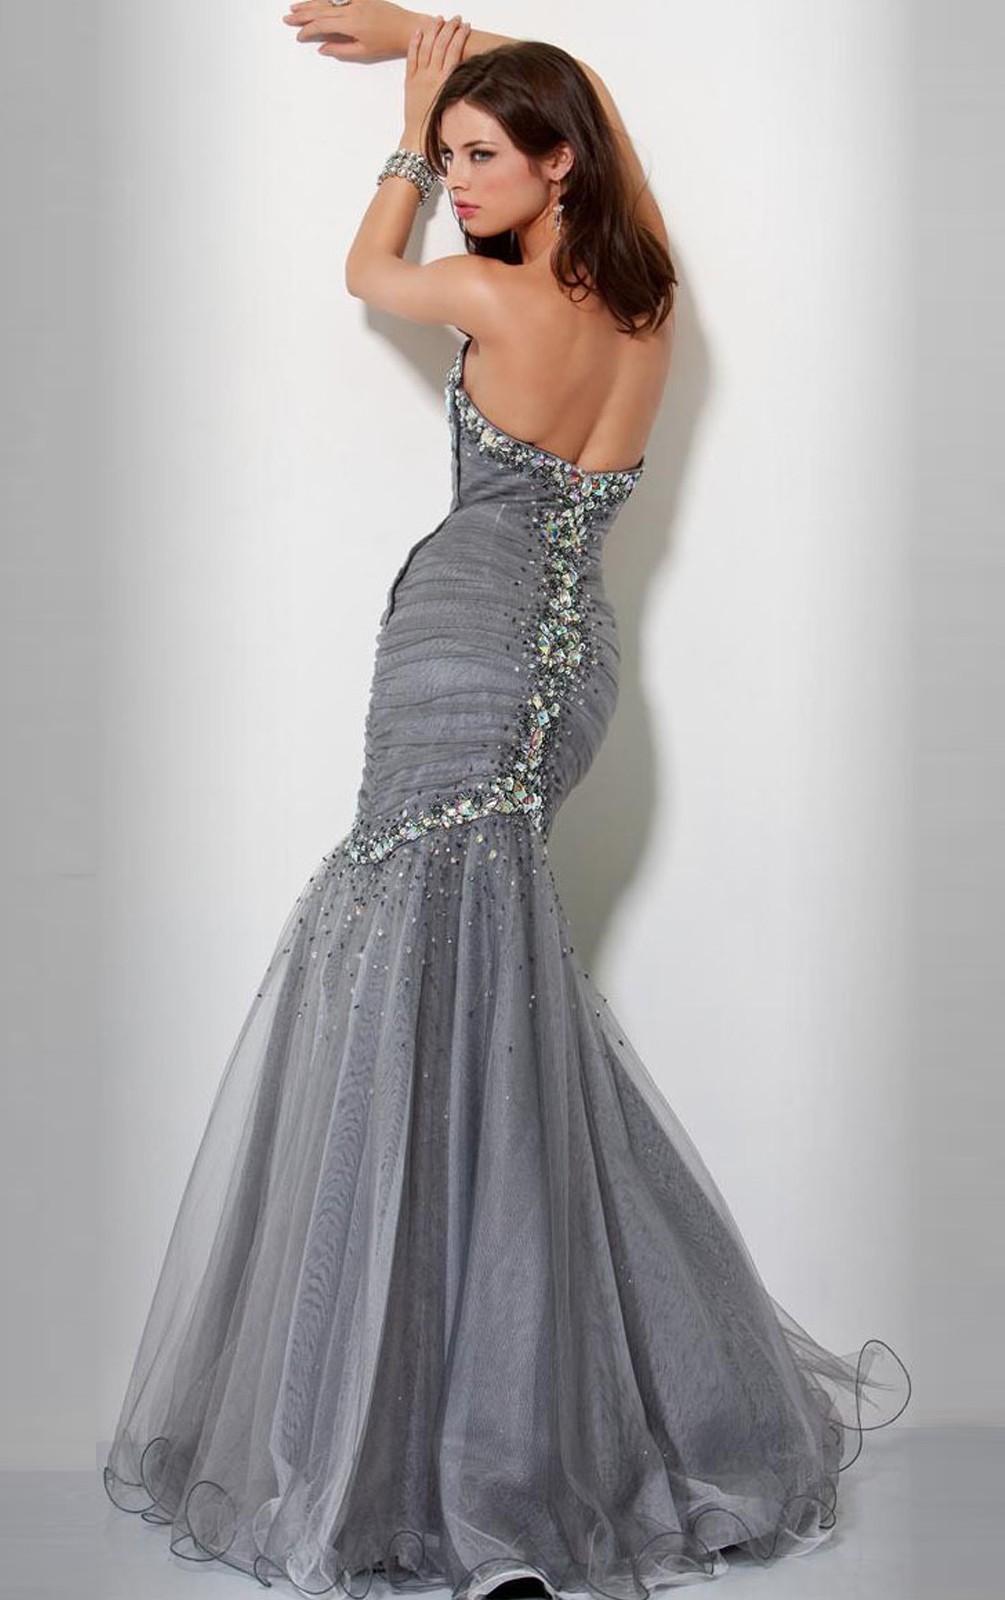 Grey Backless Prom Dress - Trends For Fall